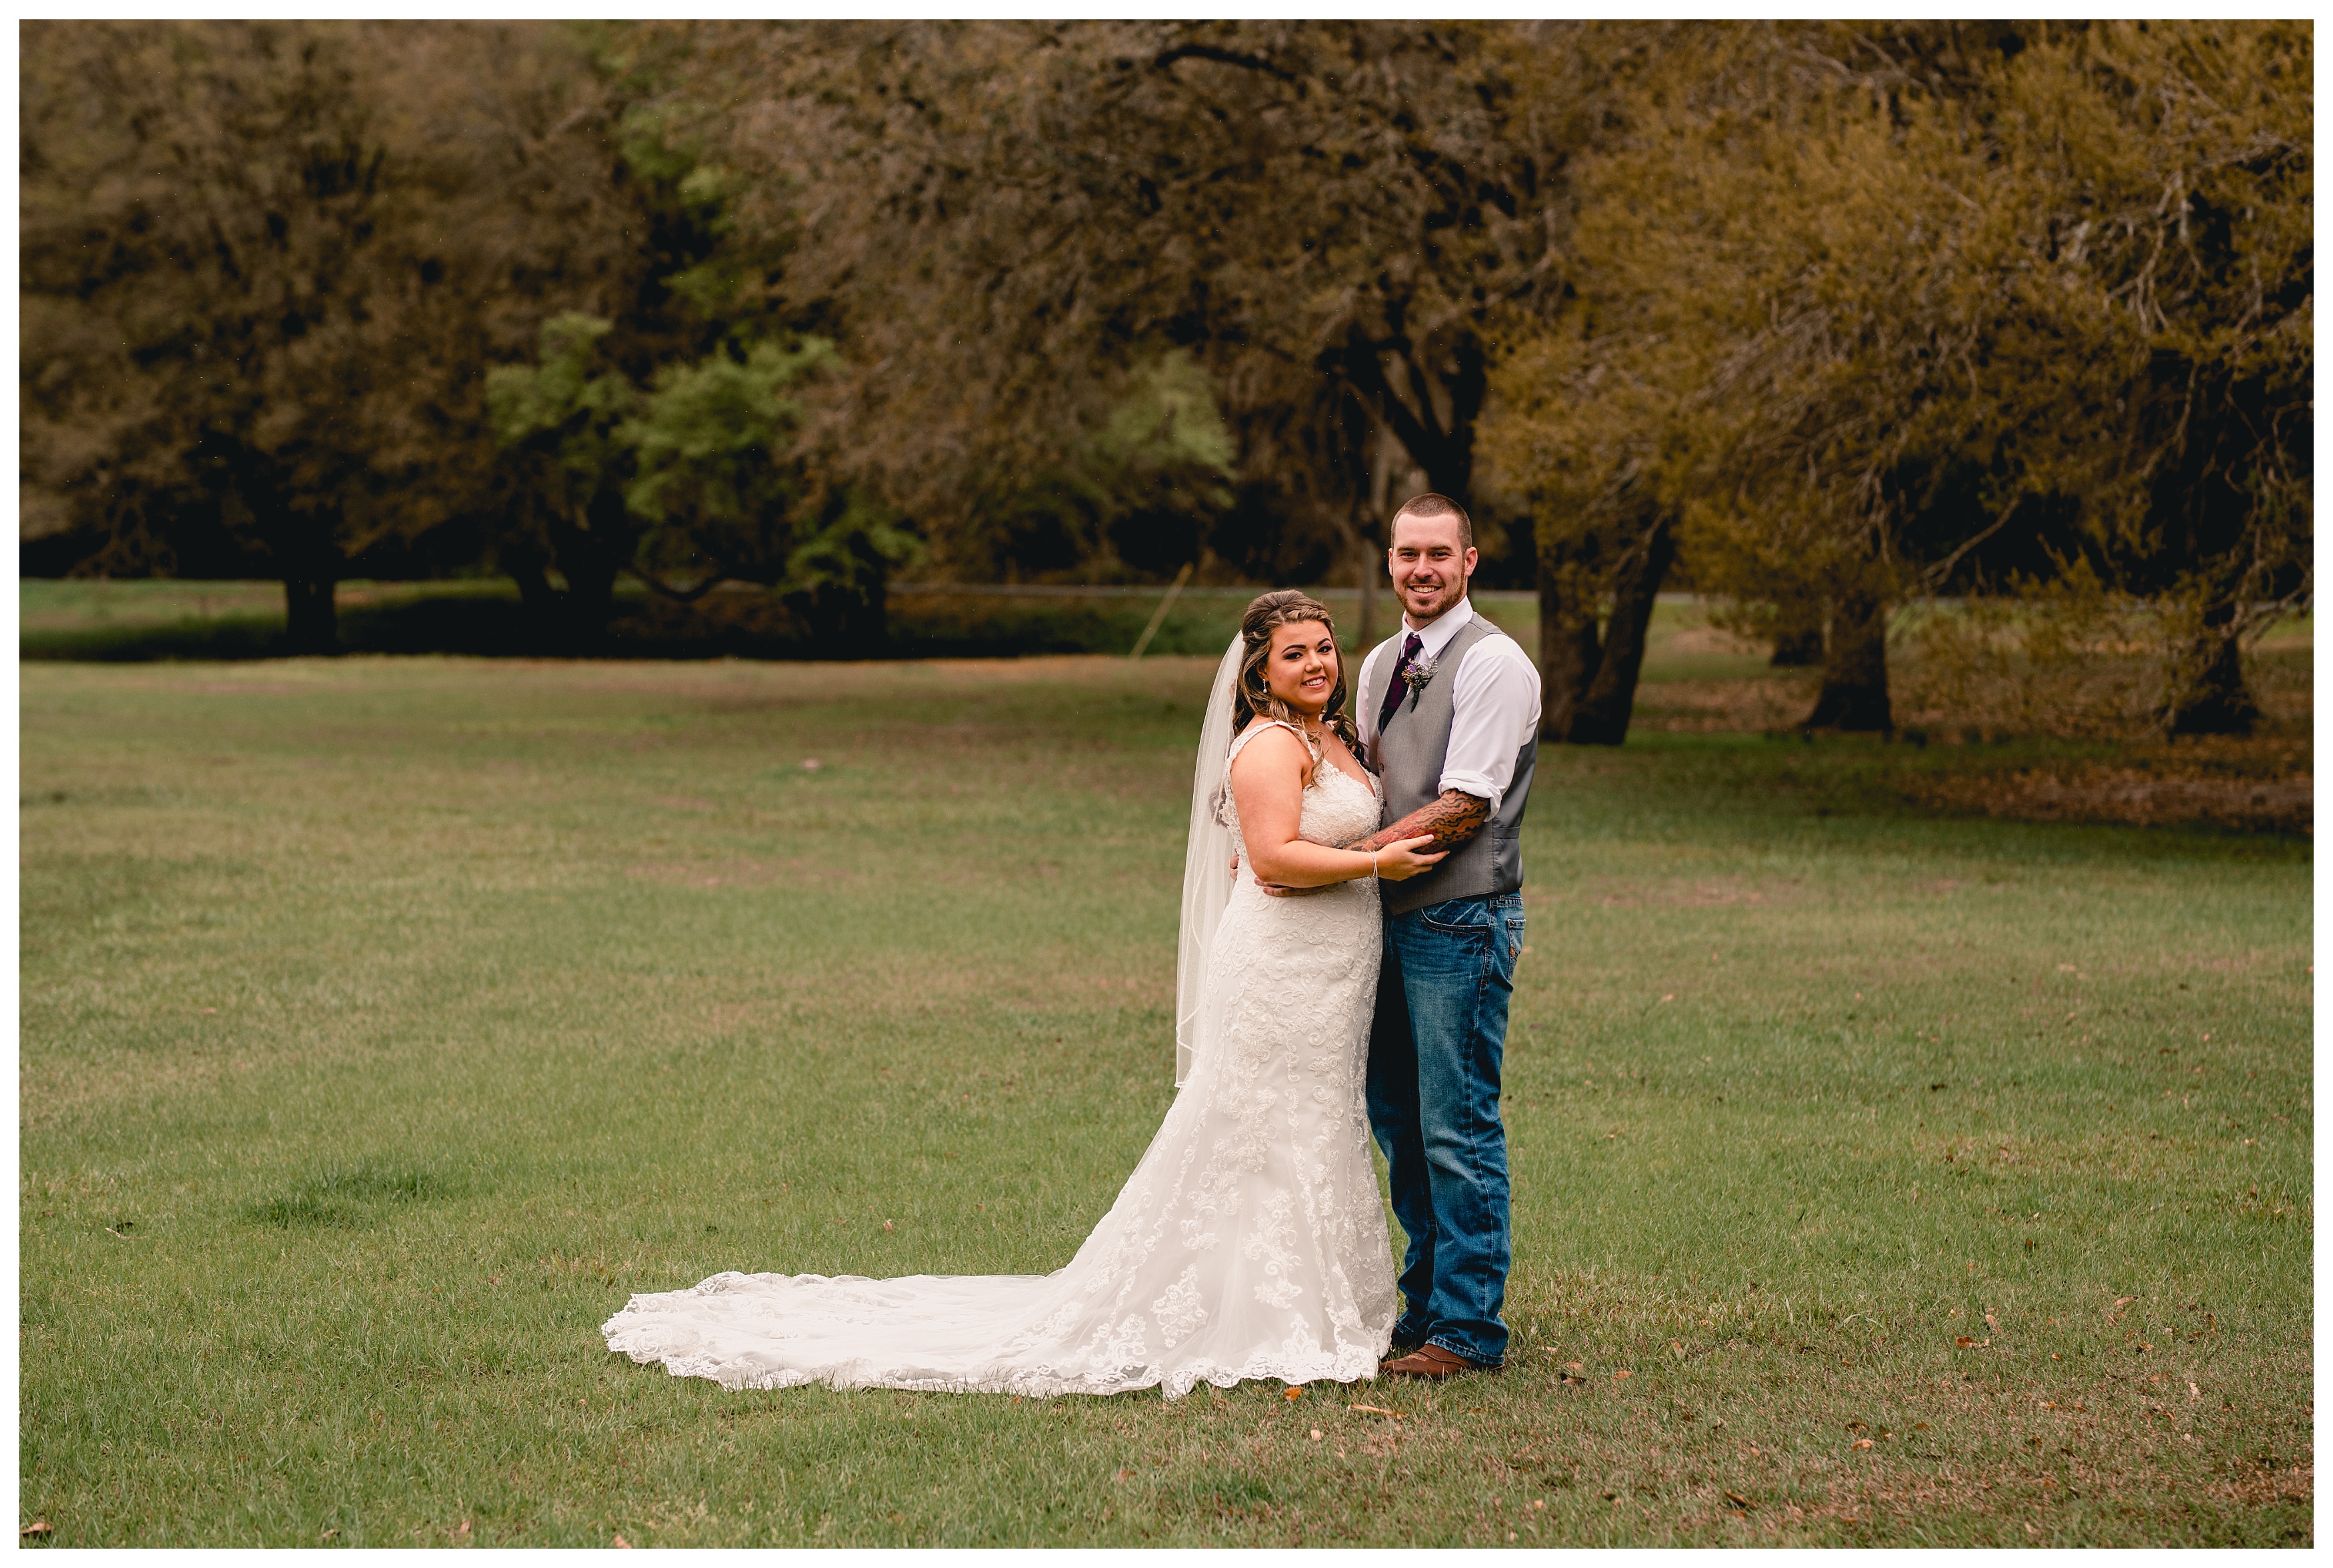 Tallahassee couple gets married at Bradley's Pond in March wedding. Shelly Williams photography